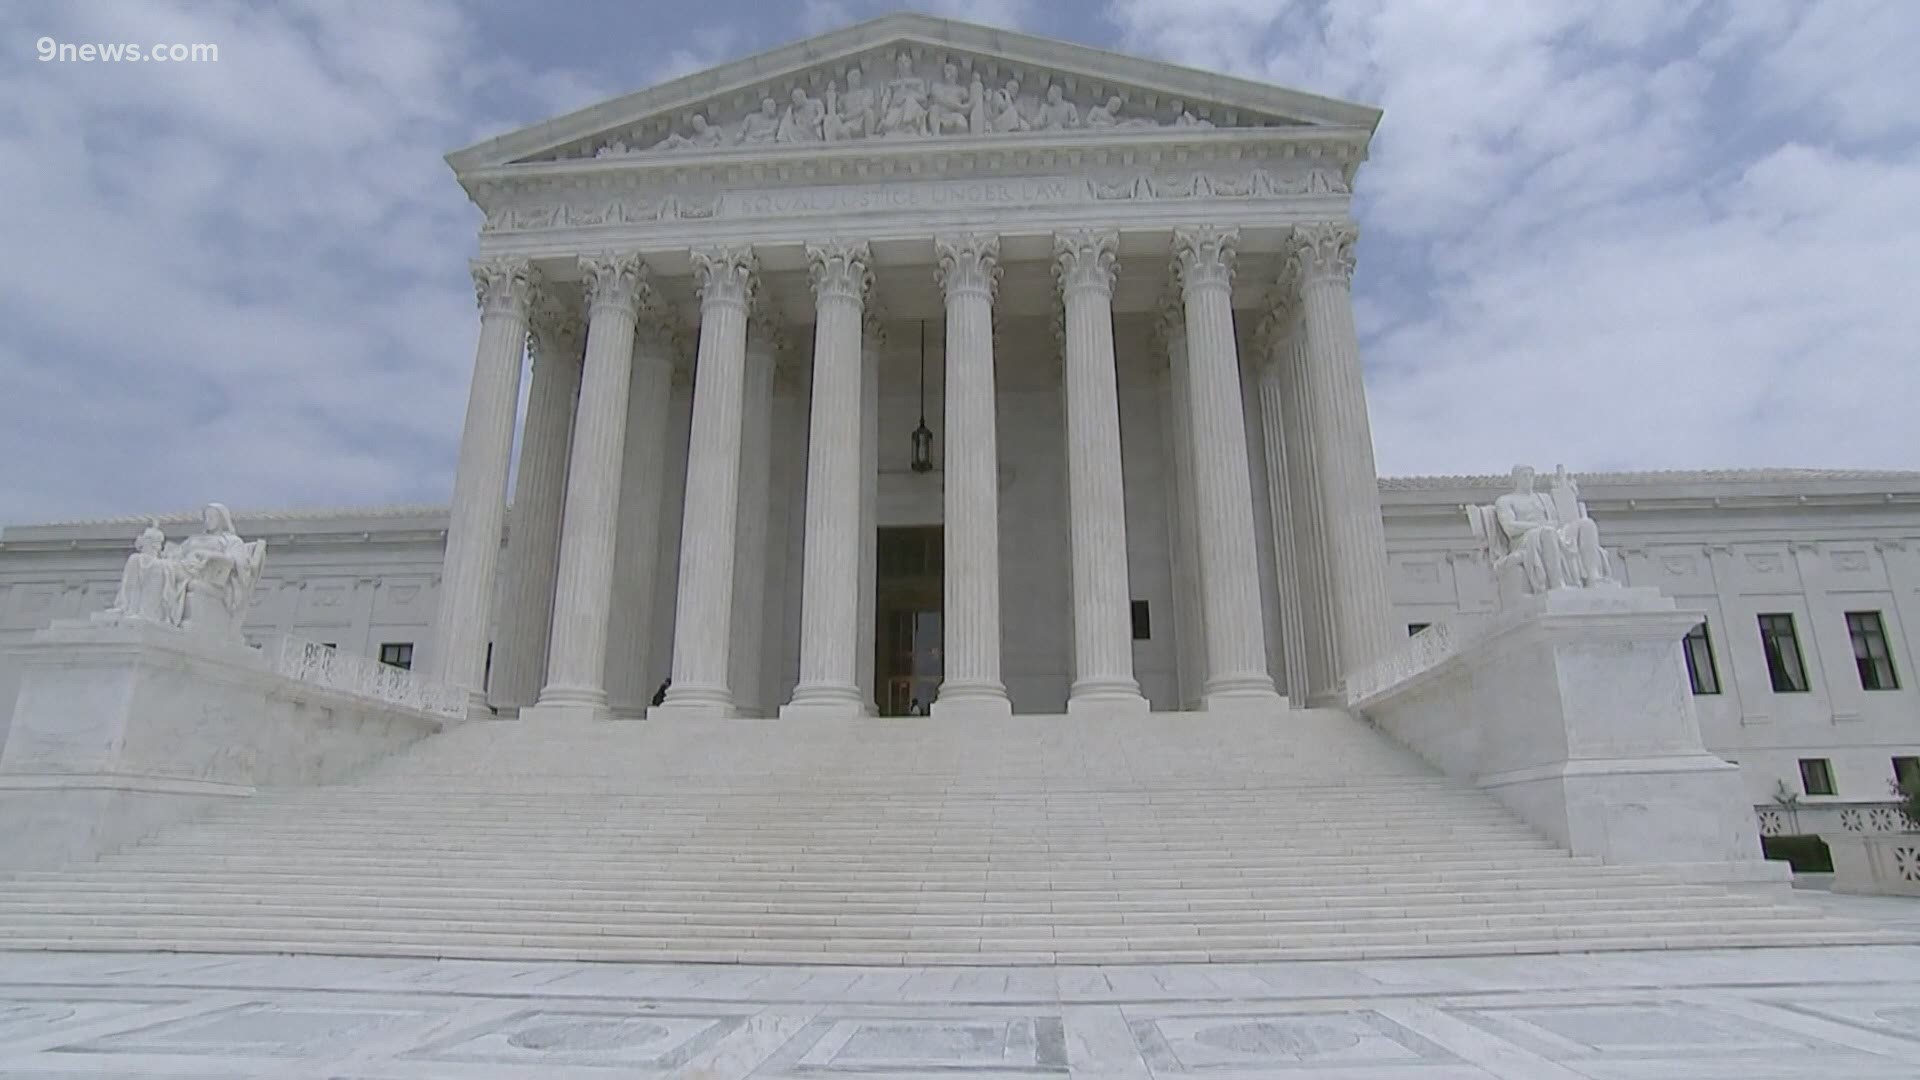 Congressional Democrats introduced legislation to expand the Supreme Court from nine to 13 justices. 9NEWS legal Analyist Whitney Traylor breaks down the effort.